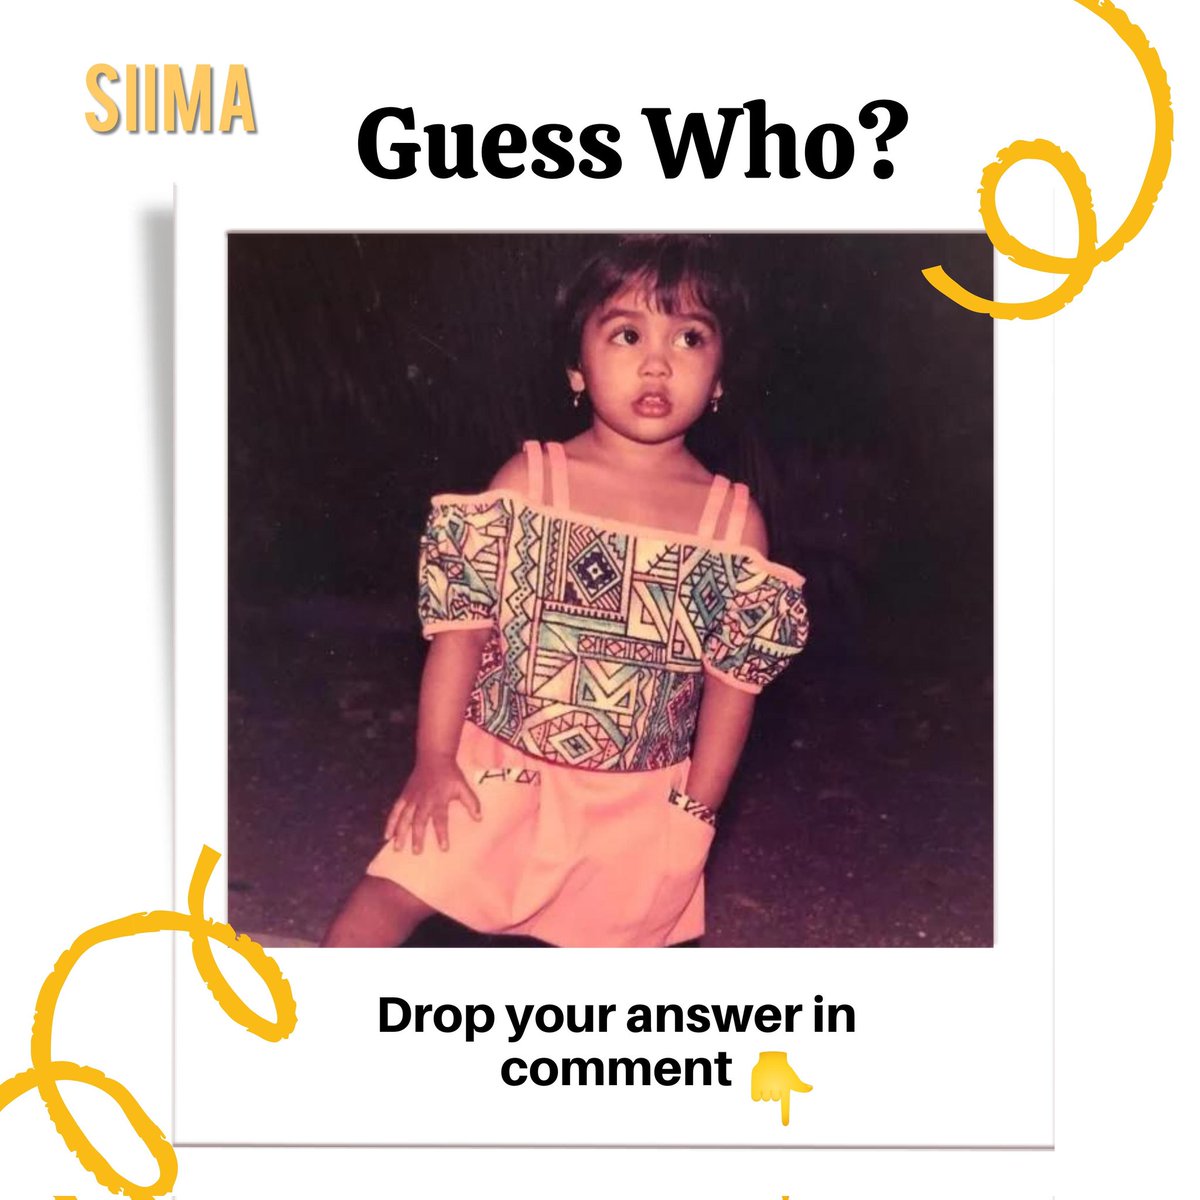 Can you guess this adorable little munchkin? 😍 Hint: She's now ruling hearts on the silver screen as a stunning leading lady! 🌟 #guessinggame #guesstheactor #tollywoood #kollywood #bollywood #southactress #siimawards #siima